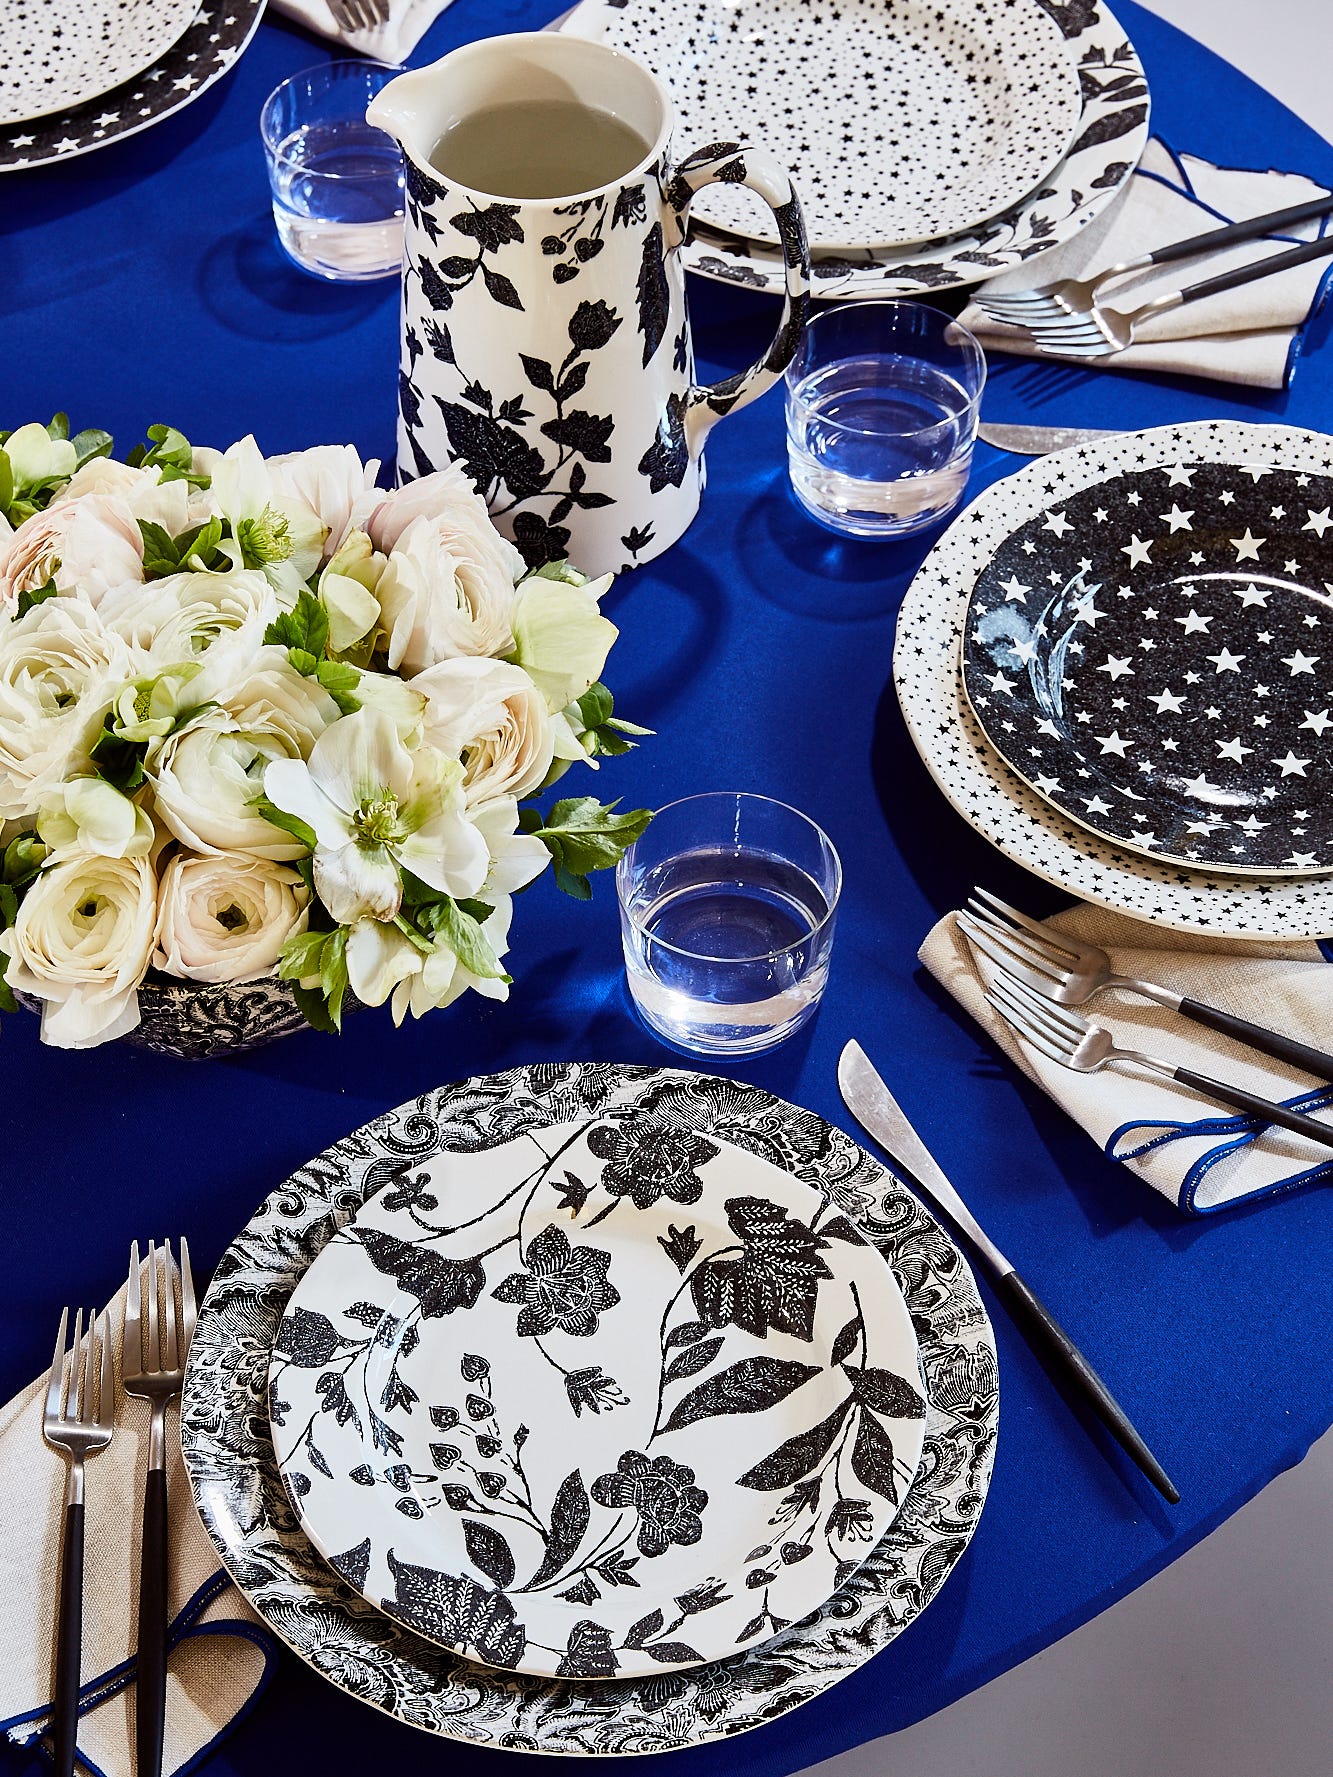 With Its New Tabletop Collection, Ralph Lauren Marries Americana and British Heritage